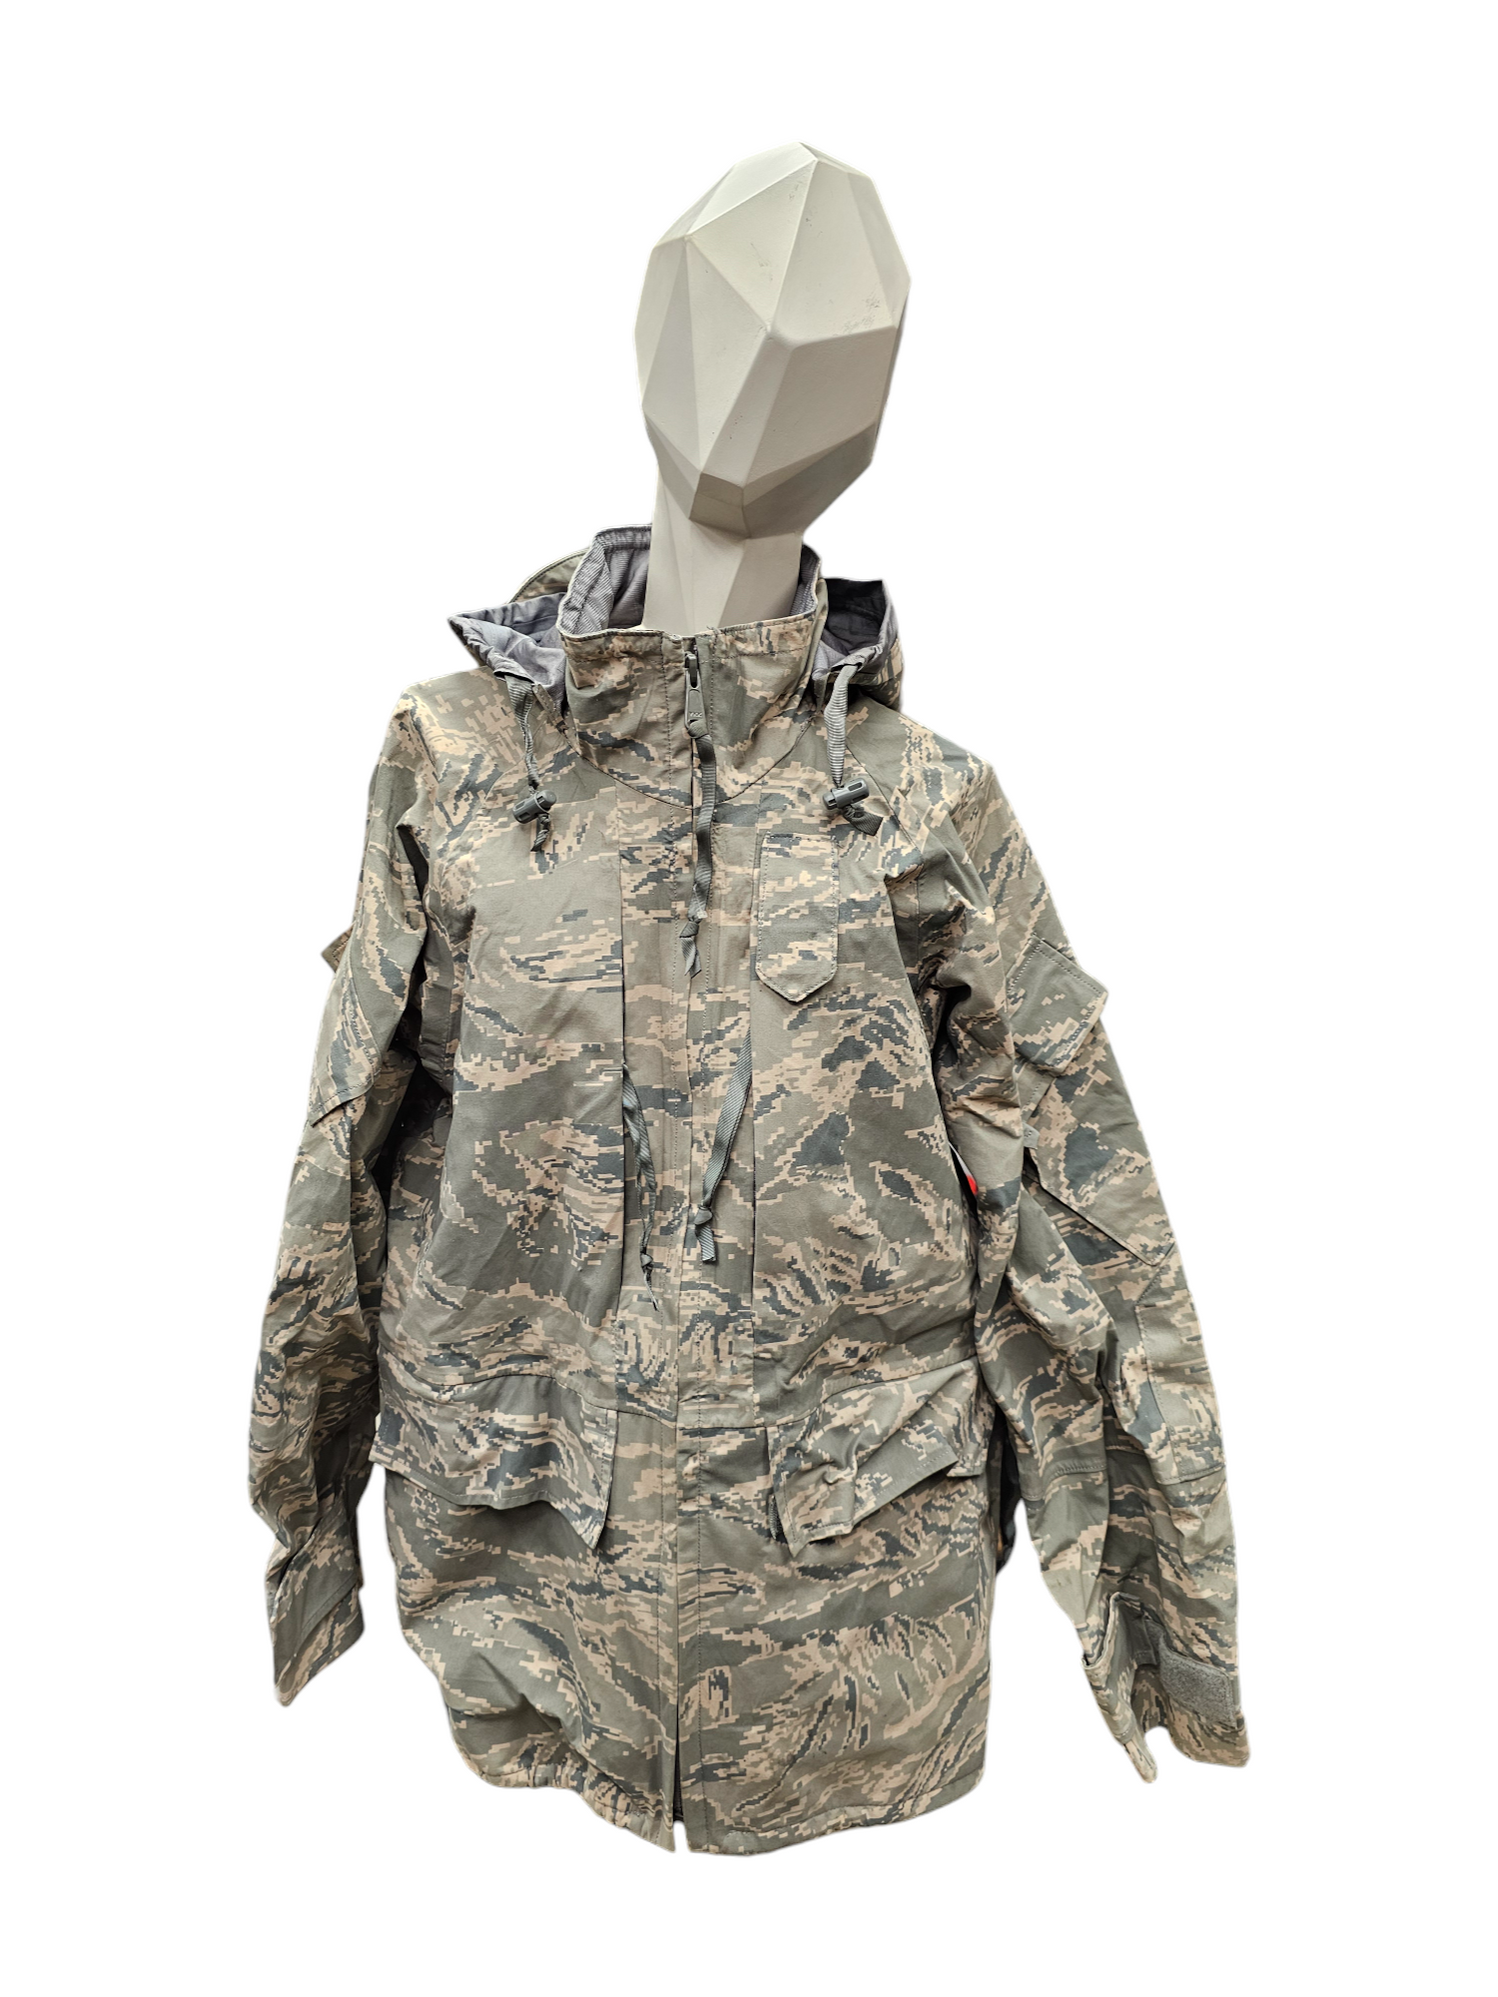 U.S. Armed Forces Airforce All Purpose Parka